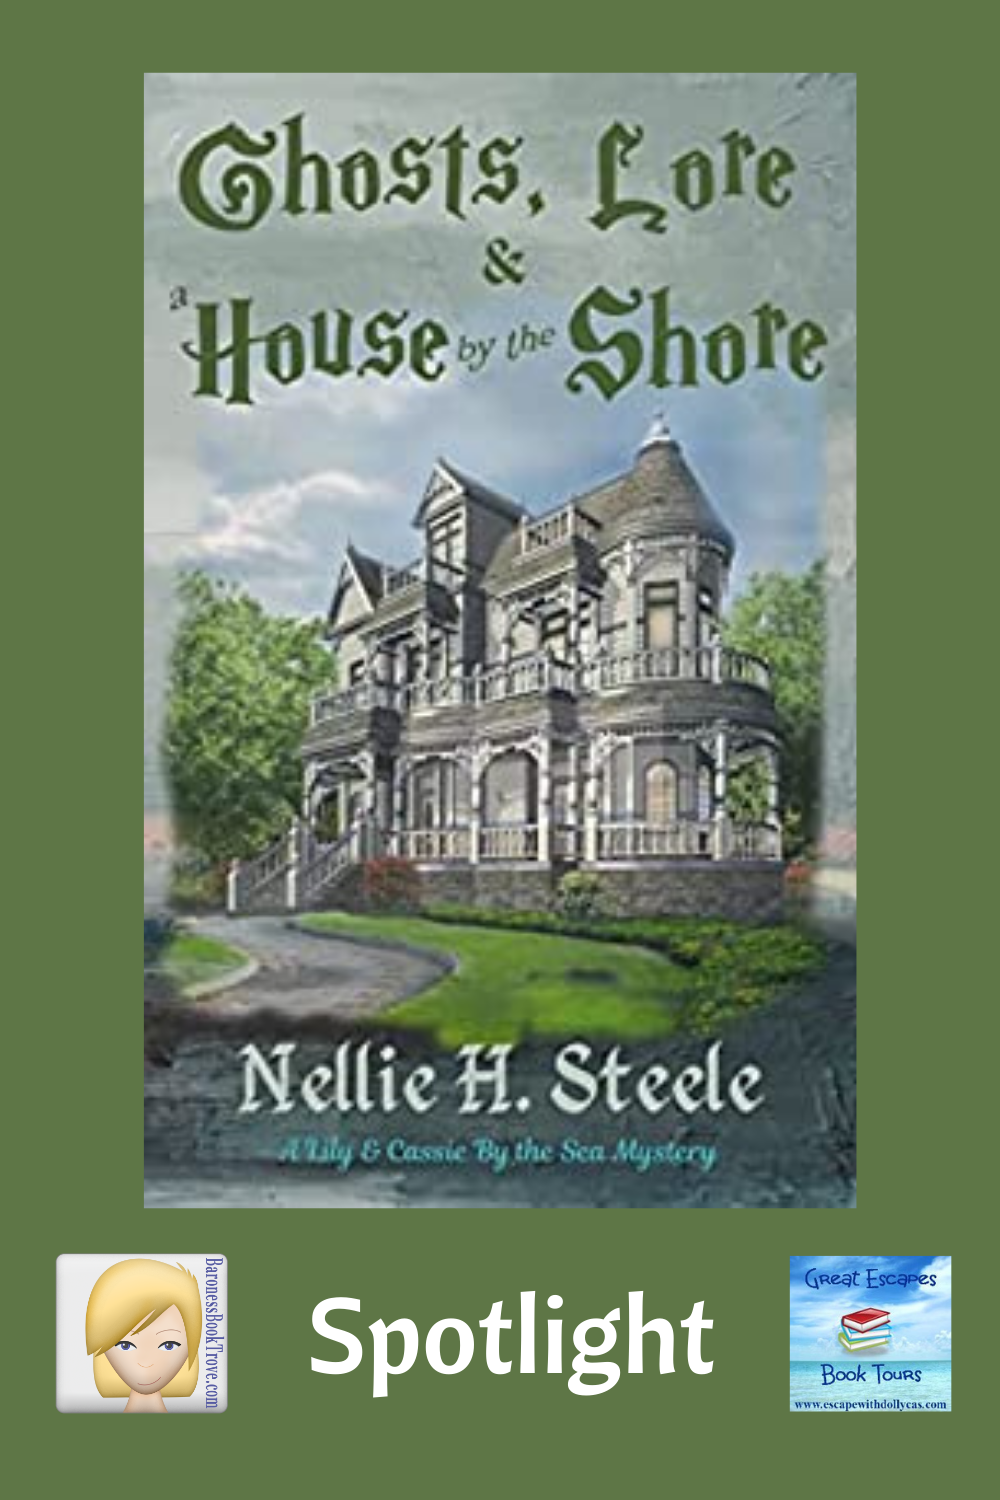 Ghosts, Lore, and a House by the Shore e SL